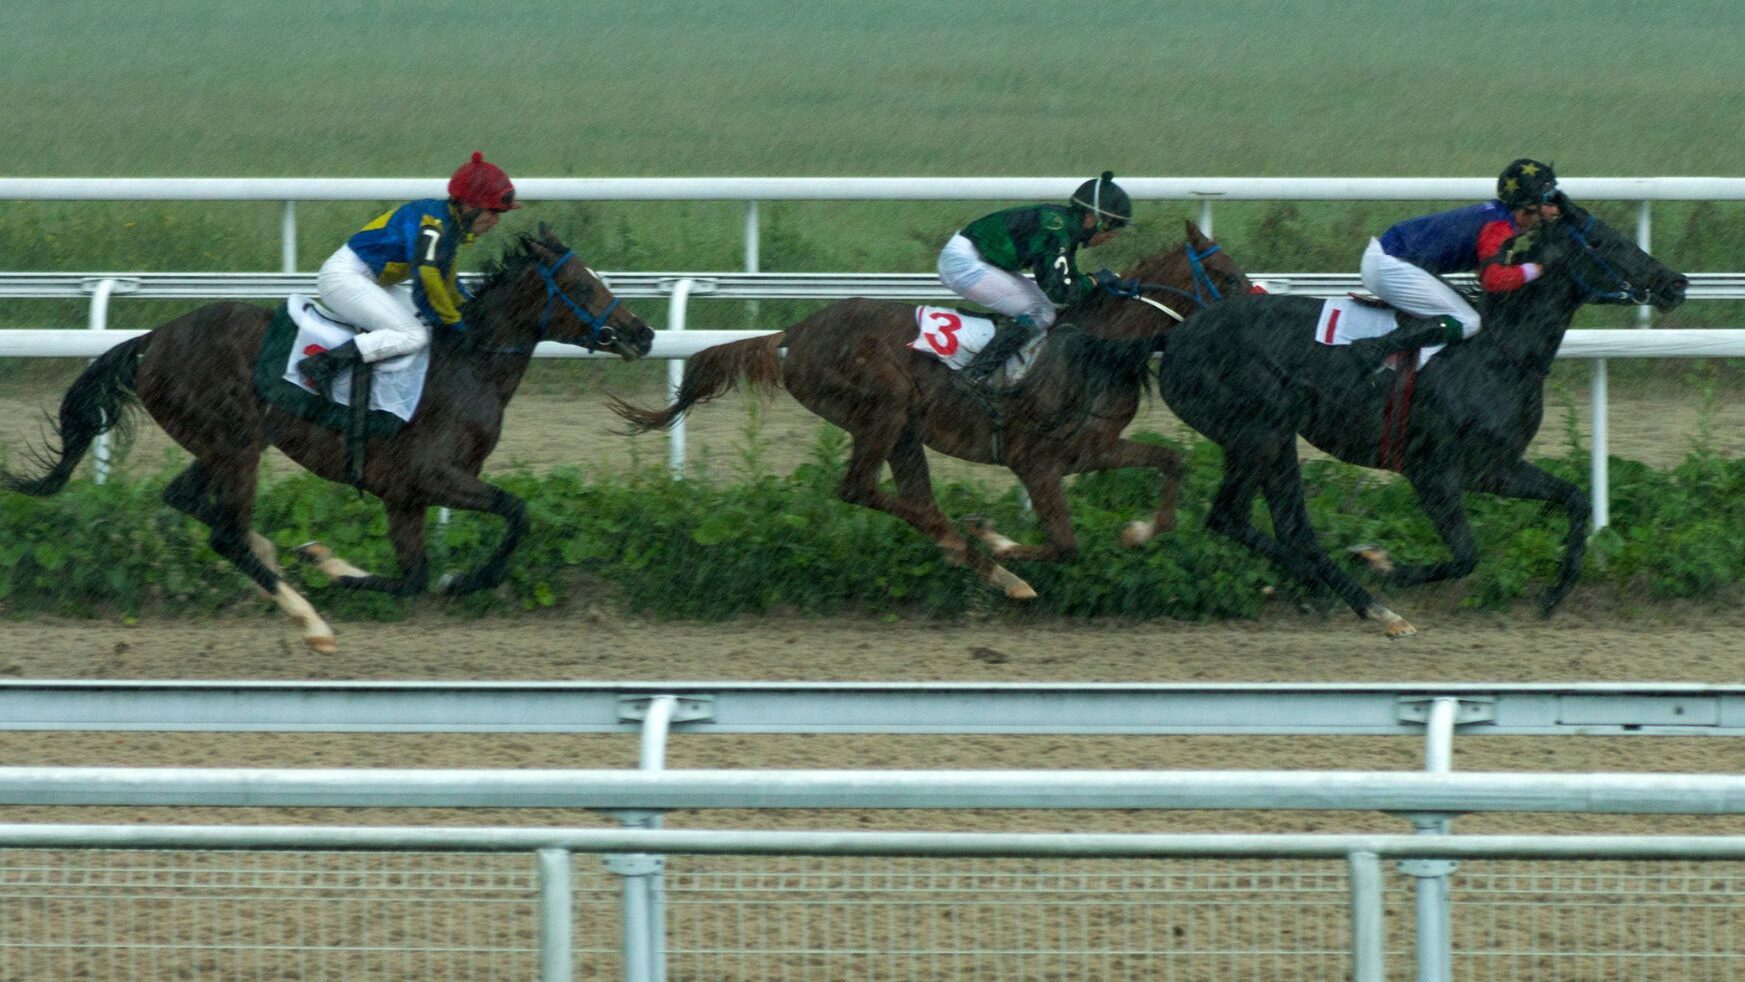 Picture of horses racing in the rain.  Weather and track conditions effect performance.